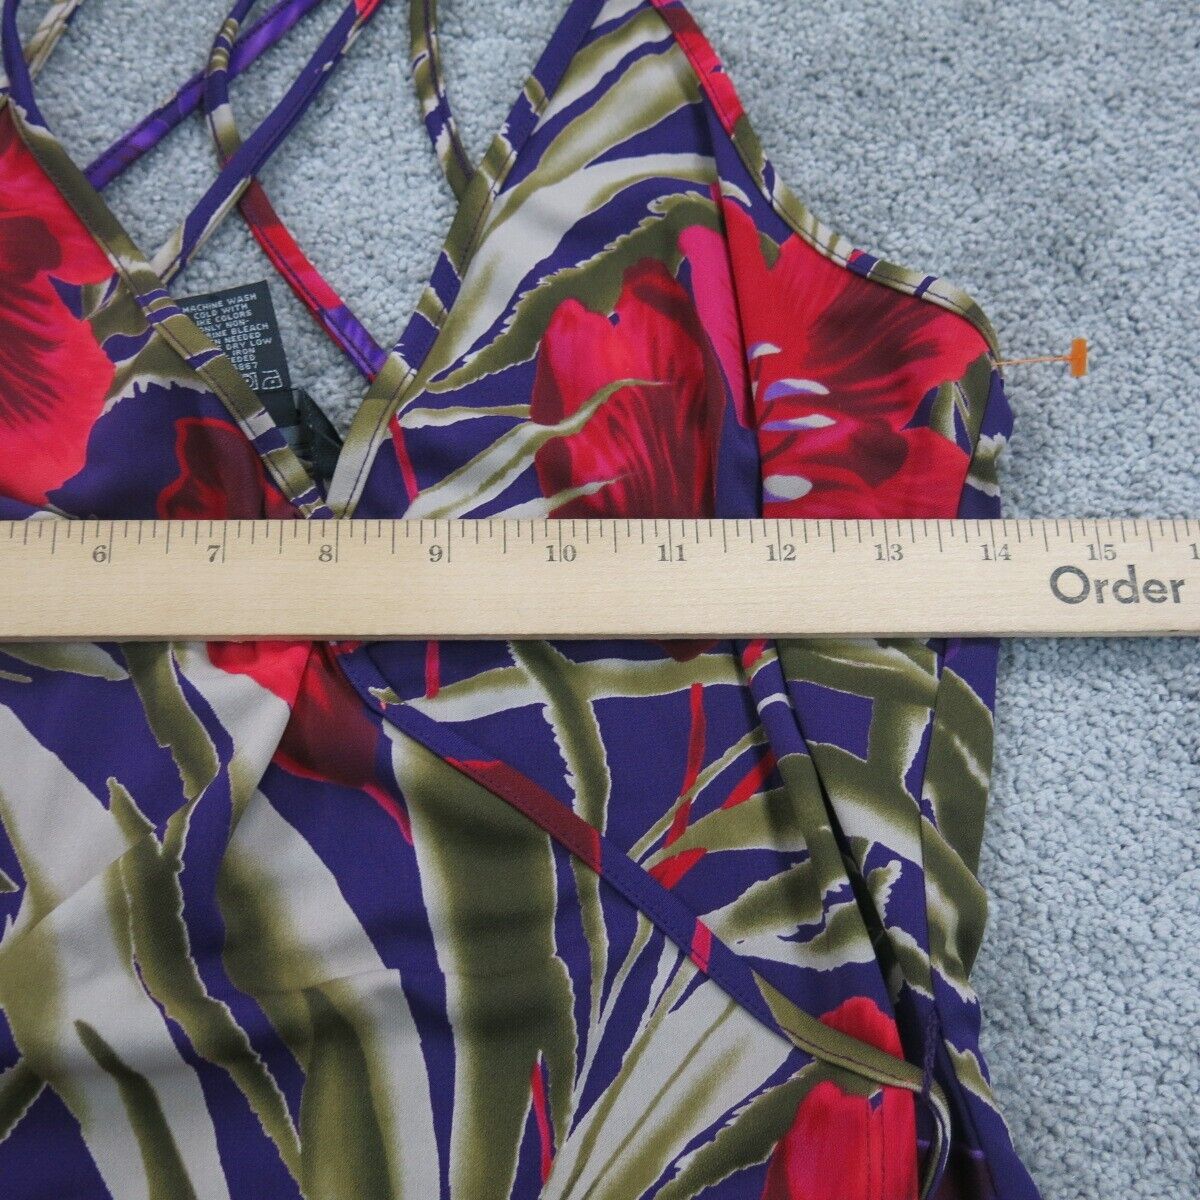 Express Womens Floral Swimwear Tankini Top Crossback Strap Red Blue Size 9/10